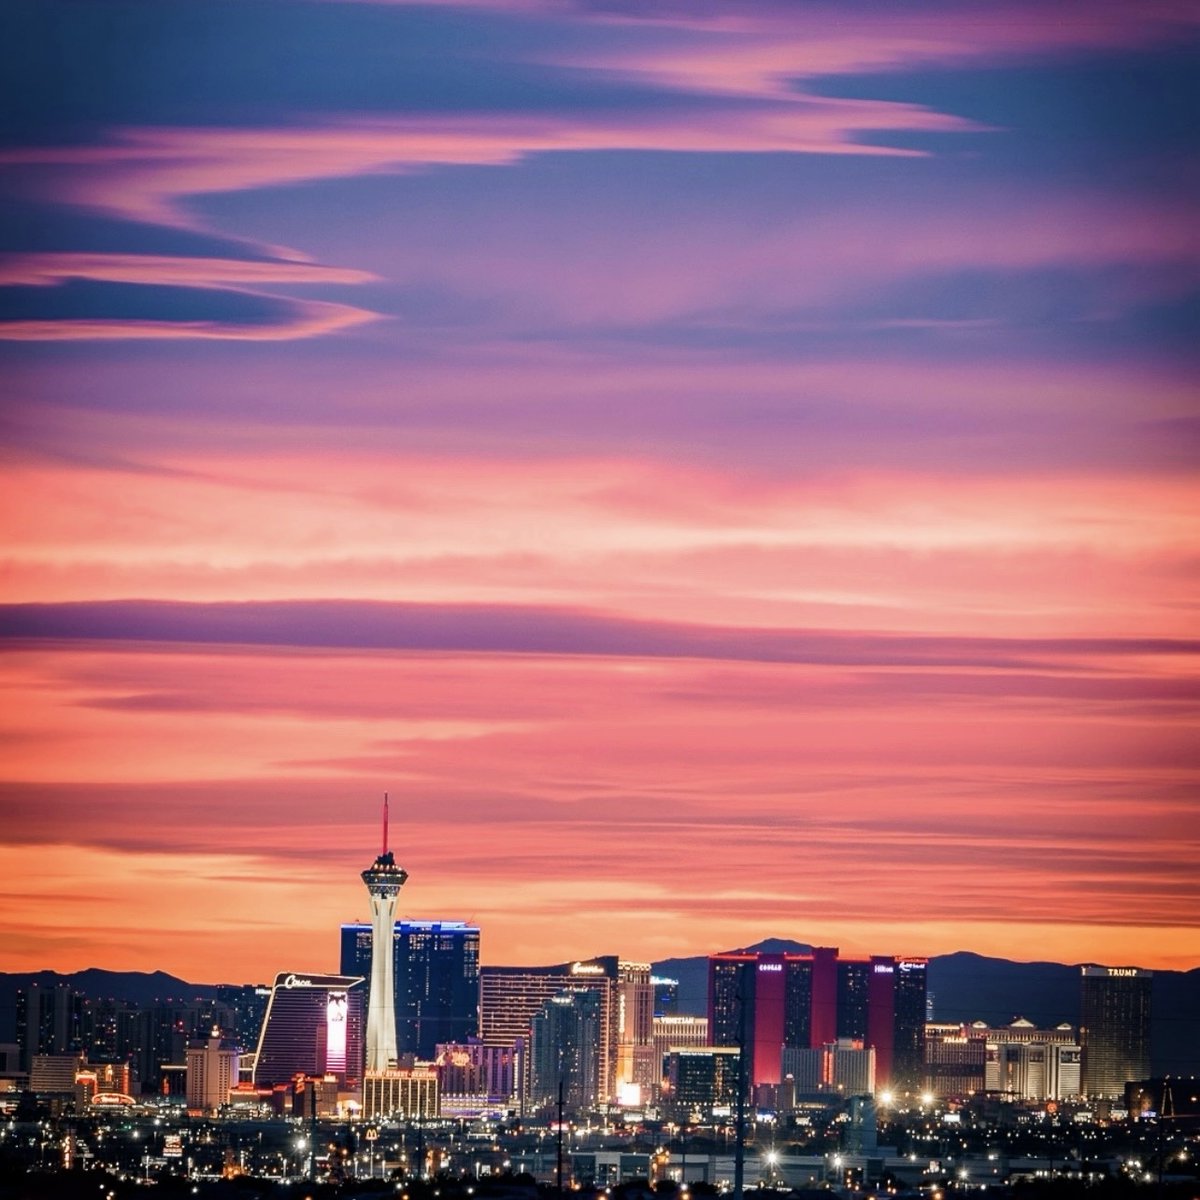 Honored to be a part of this iconic sunset skyline. 🌆 #CircaLasVegas